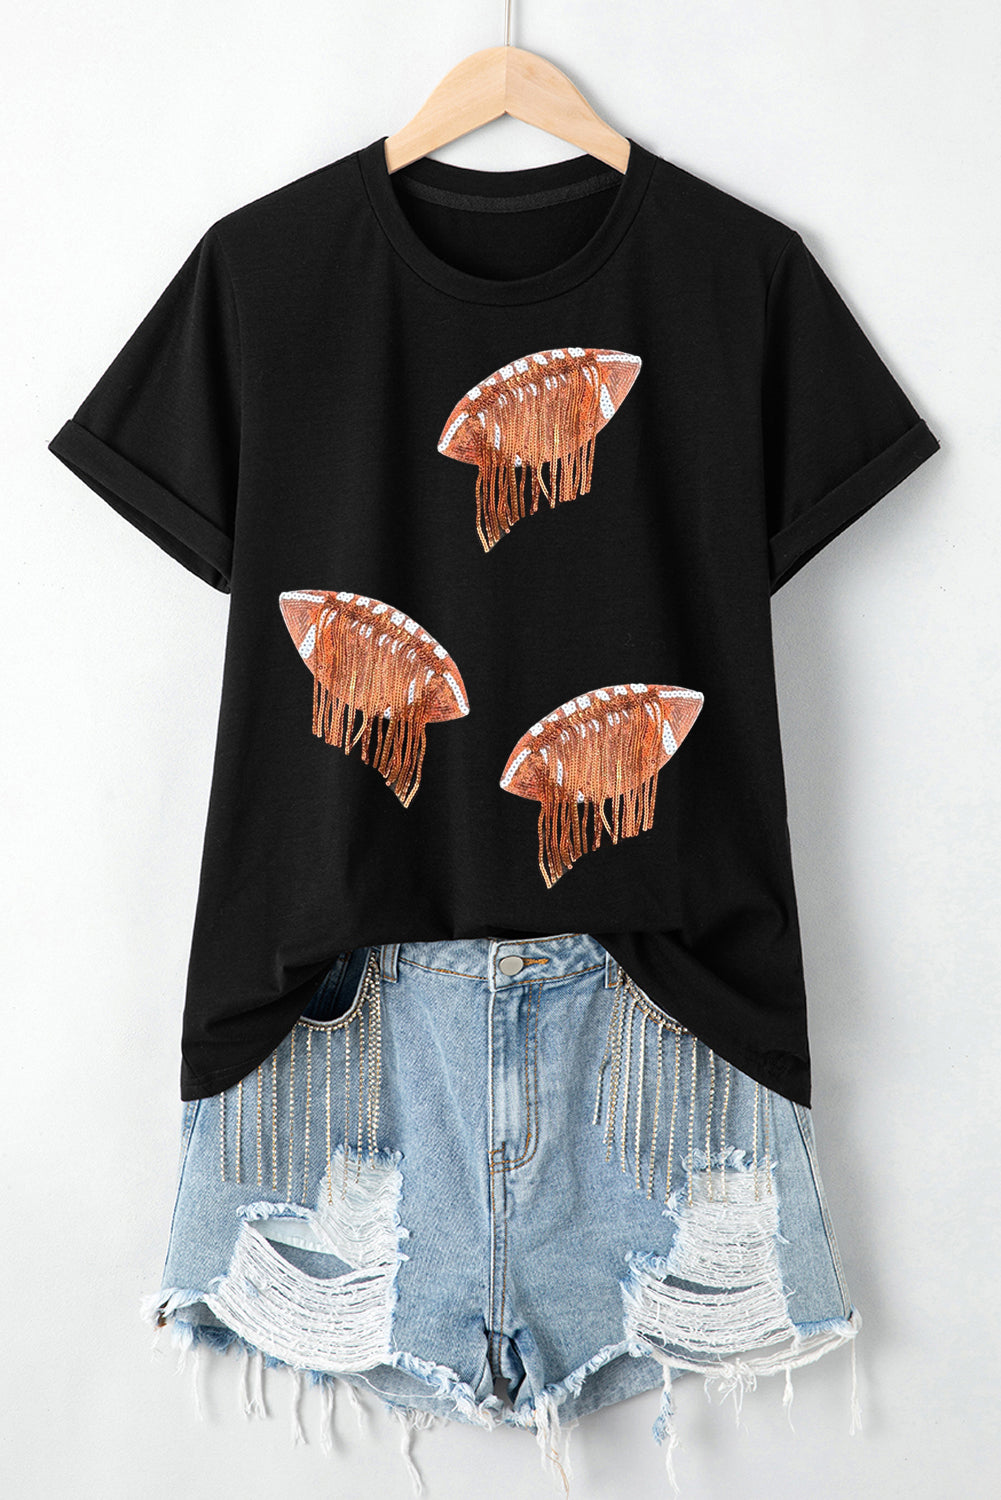 Black Sequin Fringed Rugby Graphic T Shirt Graphic Tees JT's Designer Fashion